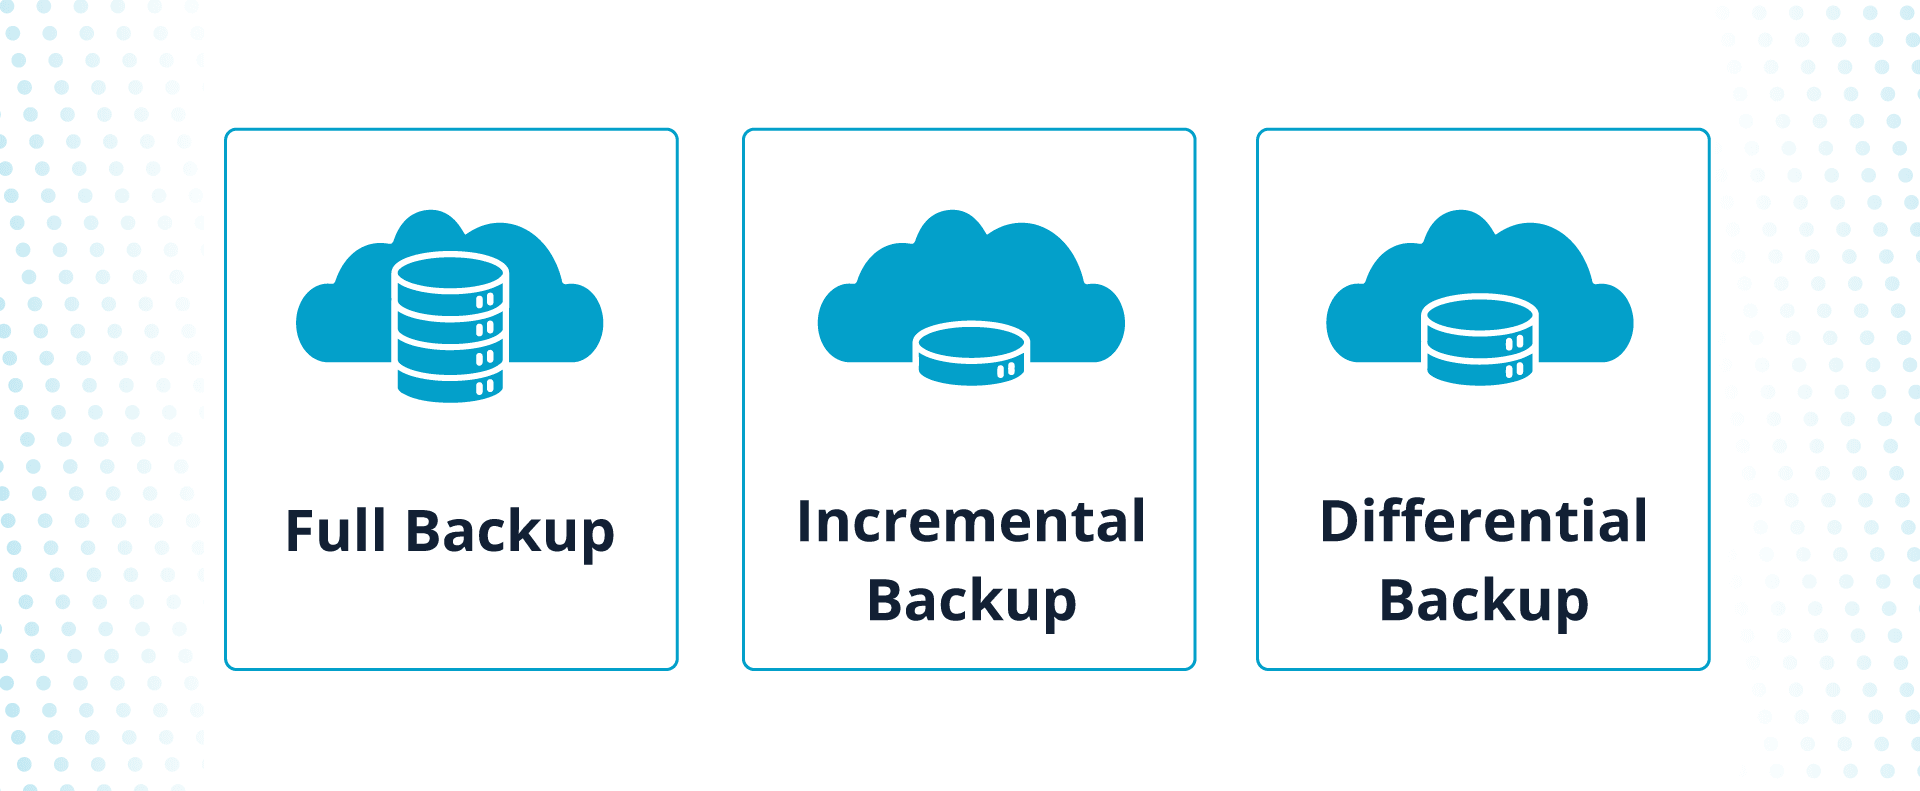 Full backups can be costly and take longer to perform than other types of backups.